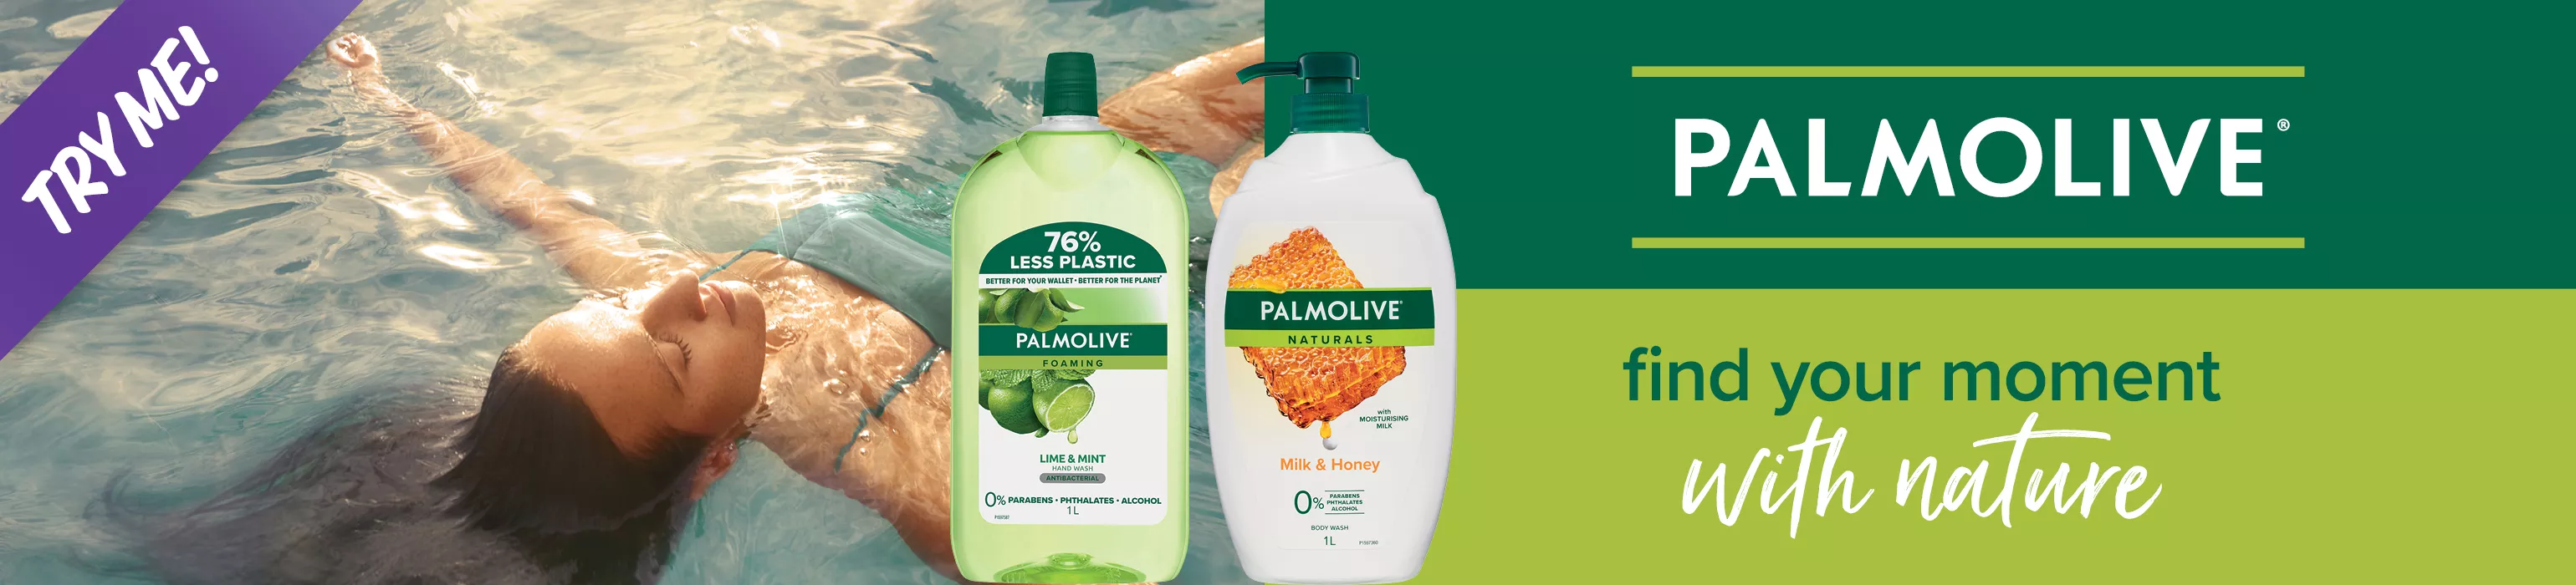 Palmolive, find your moment with nature